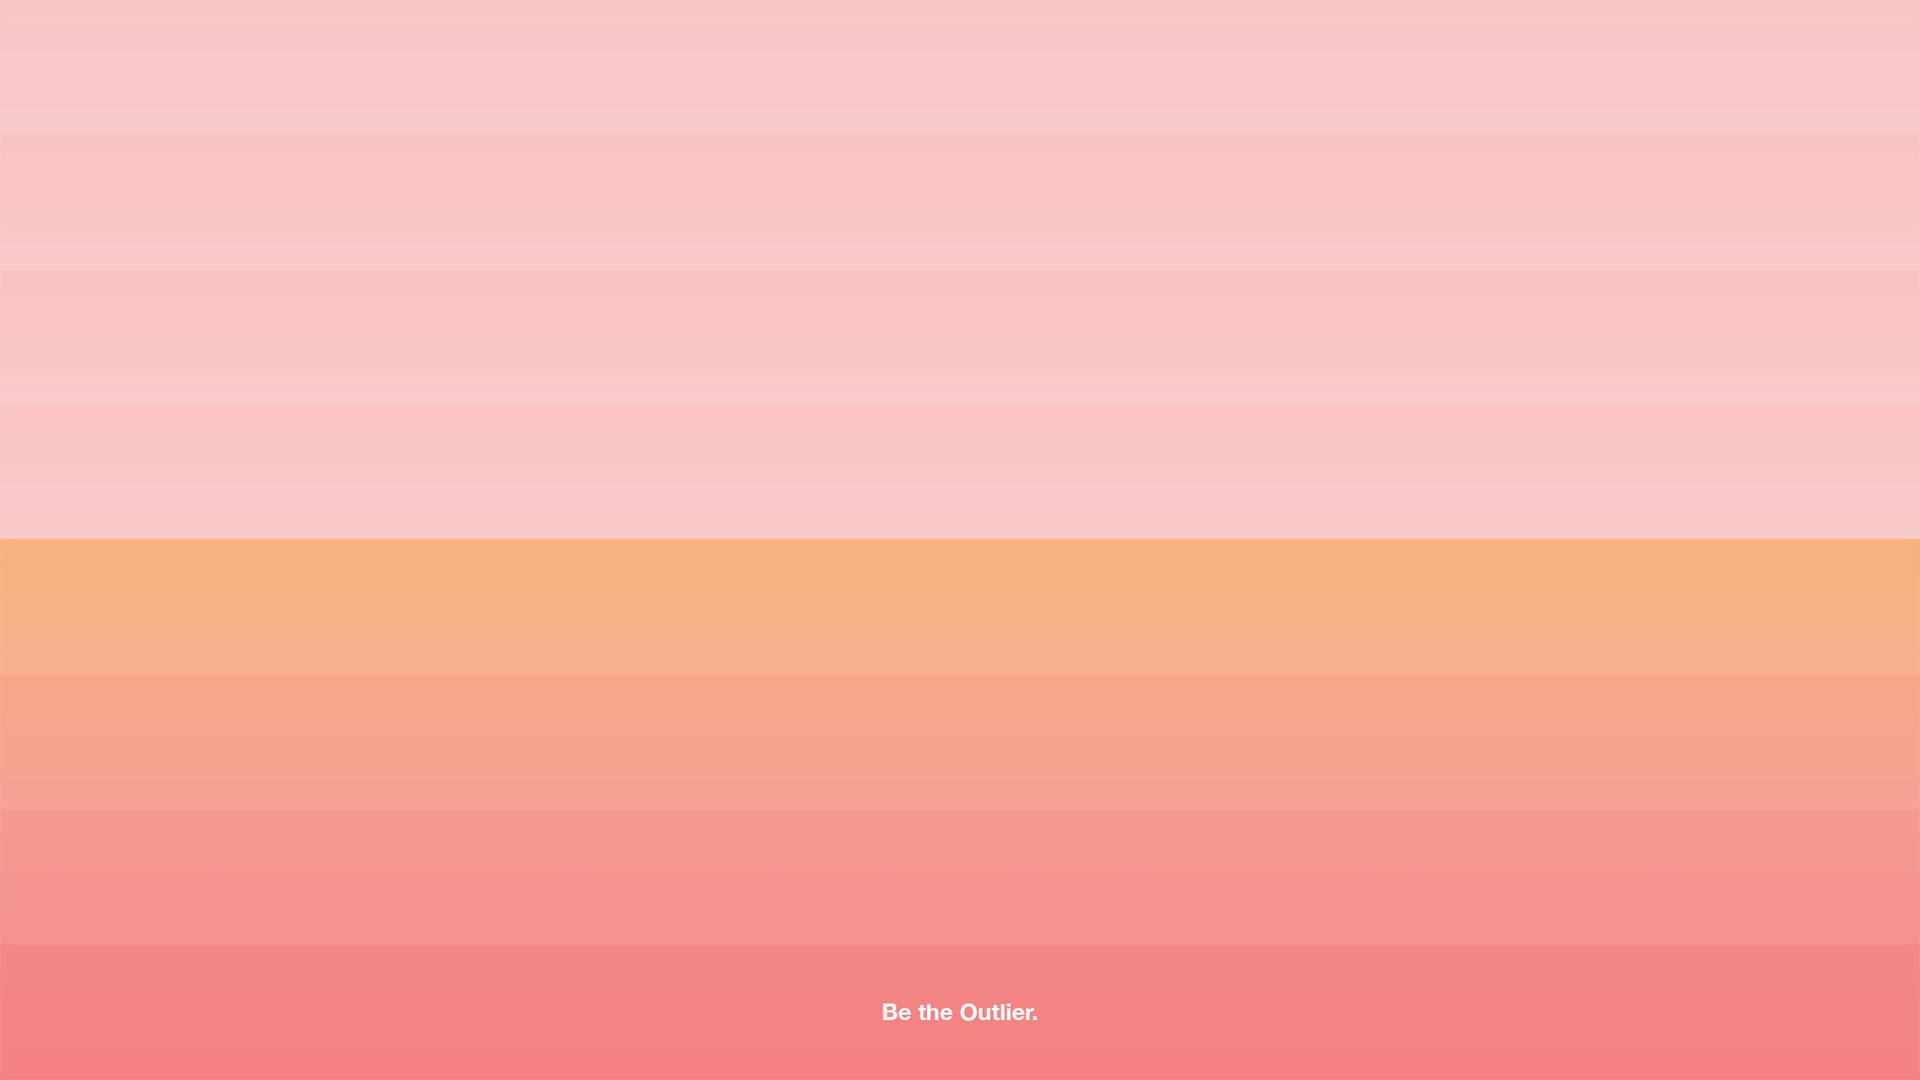 A Pink And Orange Gradient Background With A Pink And Orange Gradient Wallpaper